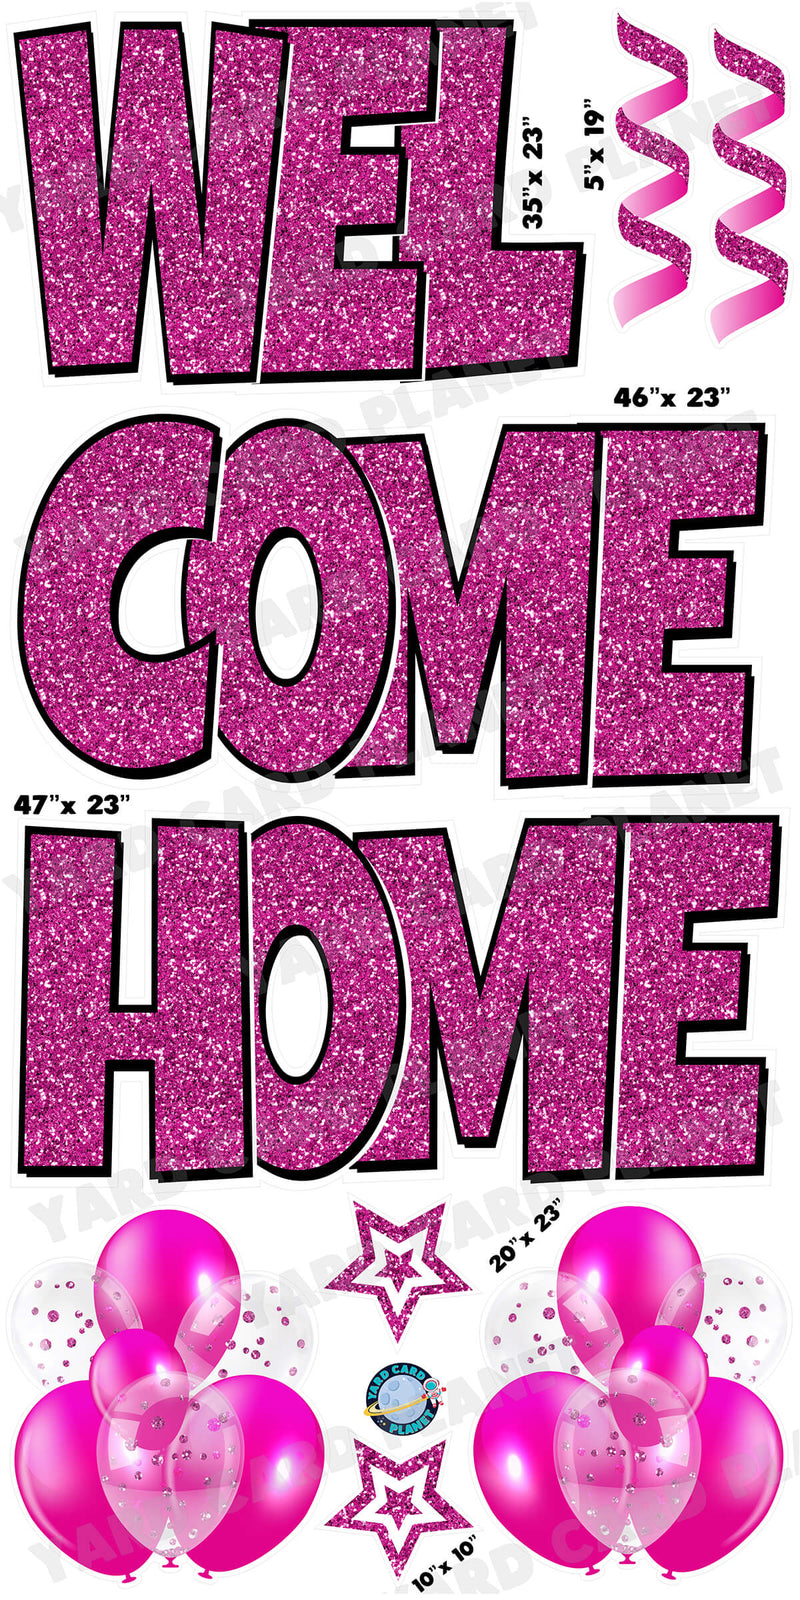 Large 23" Welcome Home Yard Card EZ Quick Sets in Luckiest Guy Font and Flair in Hot Pink Glitter Pattern